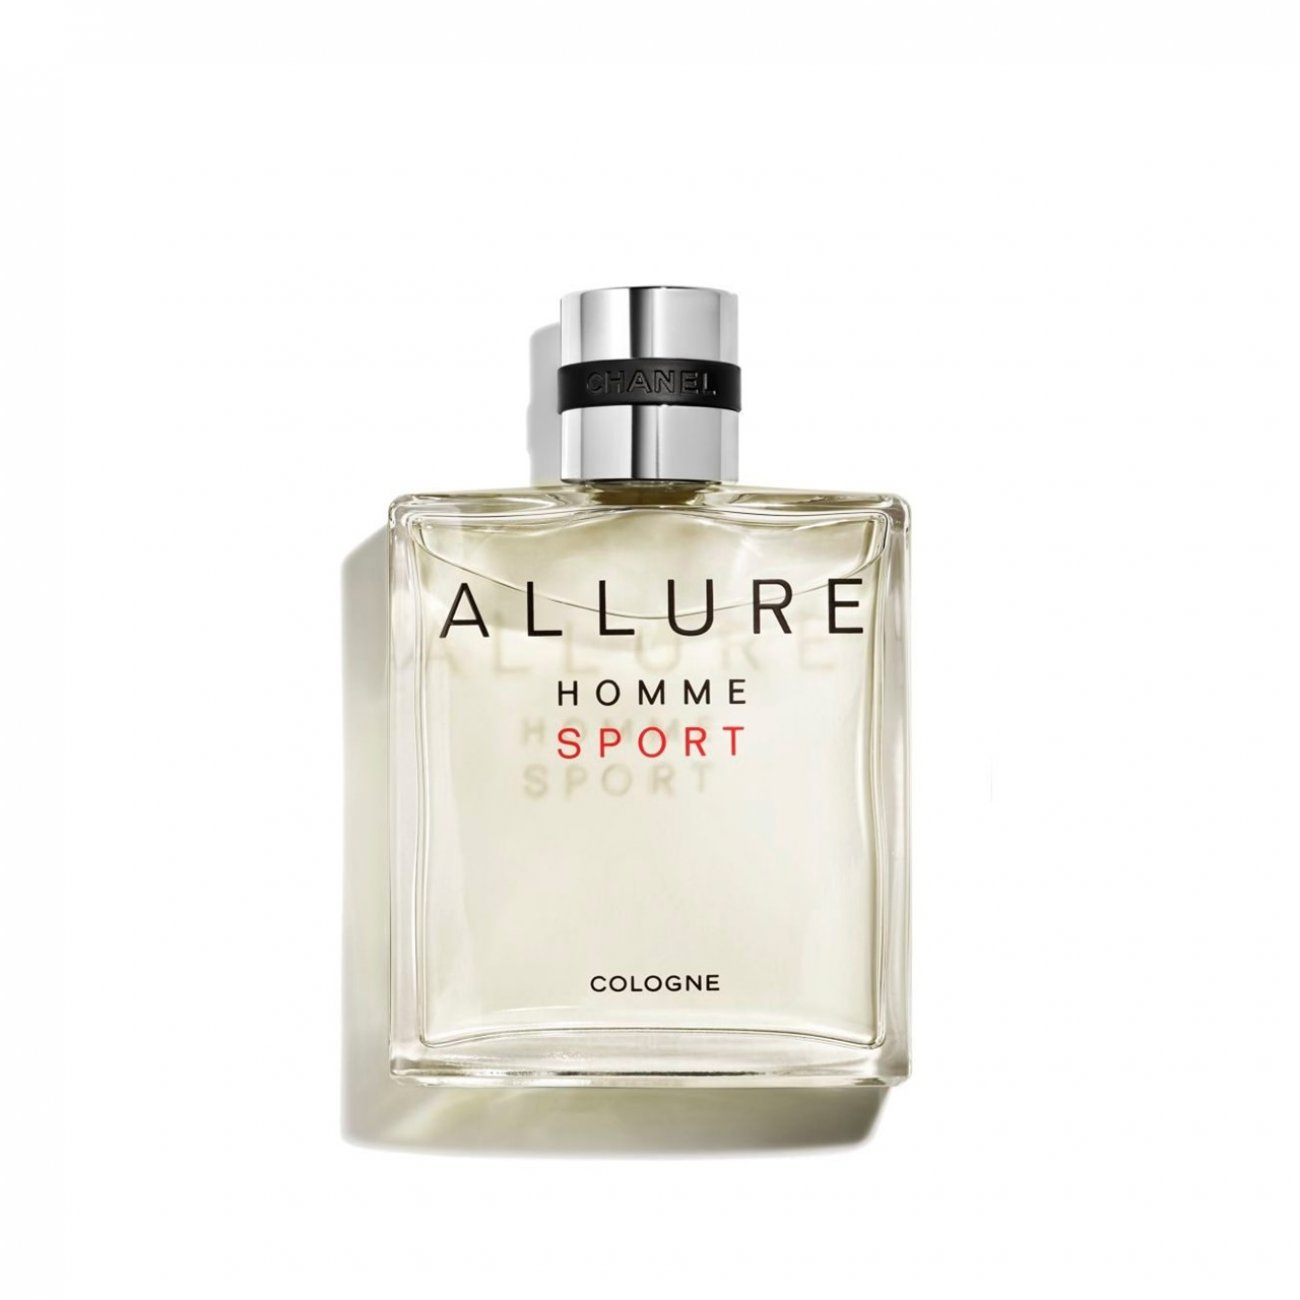 CHANEL Allure Homme Sport Cologne 50ml